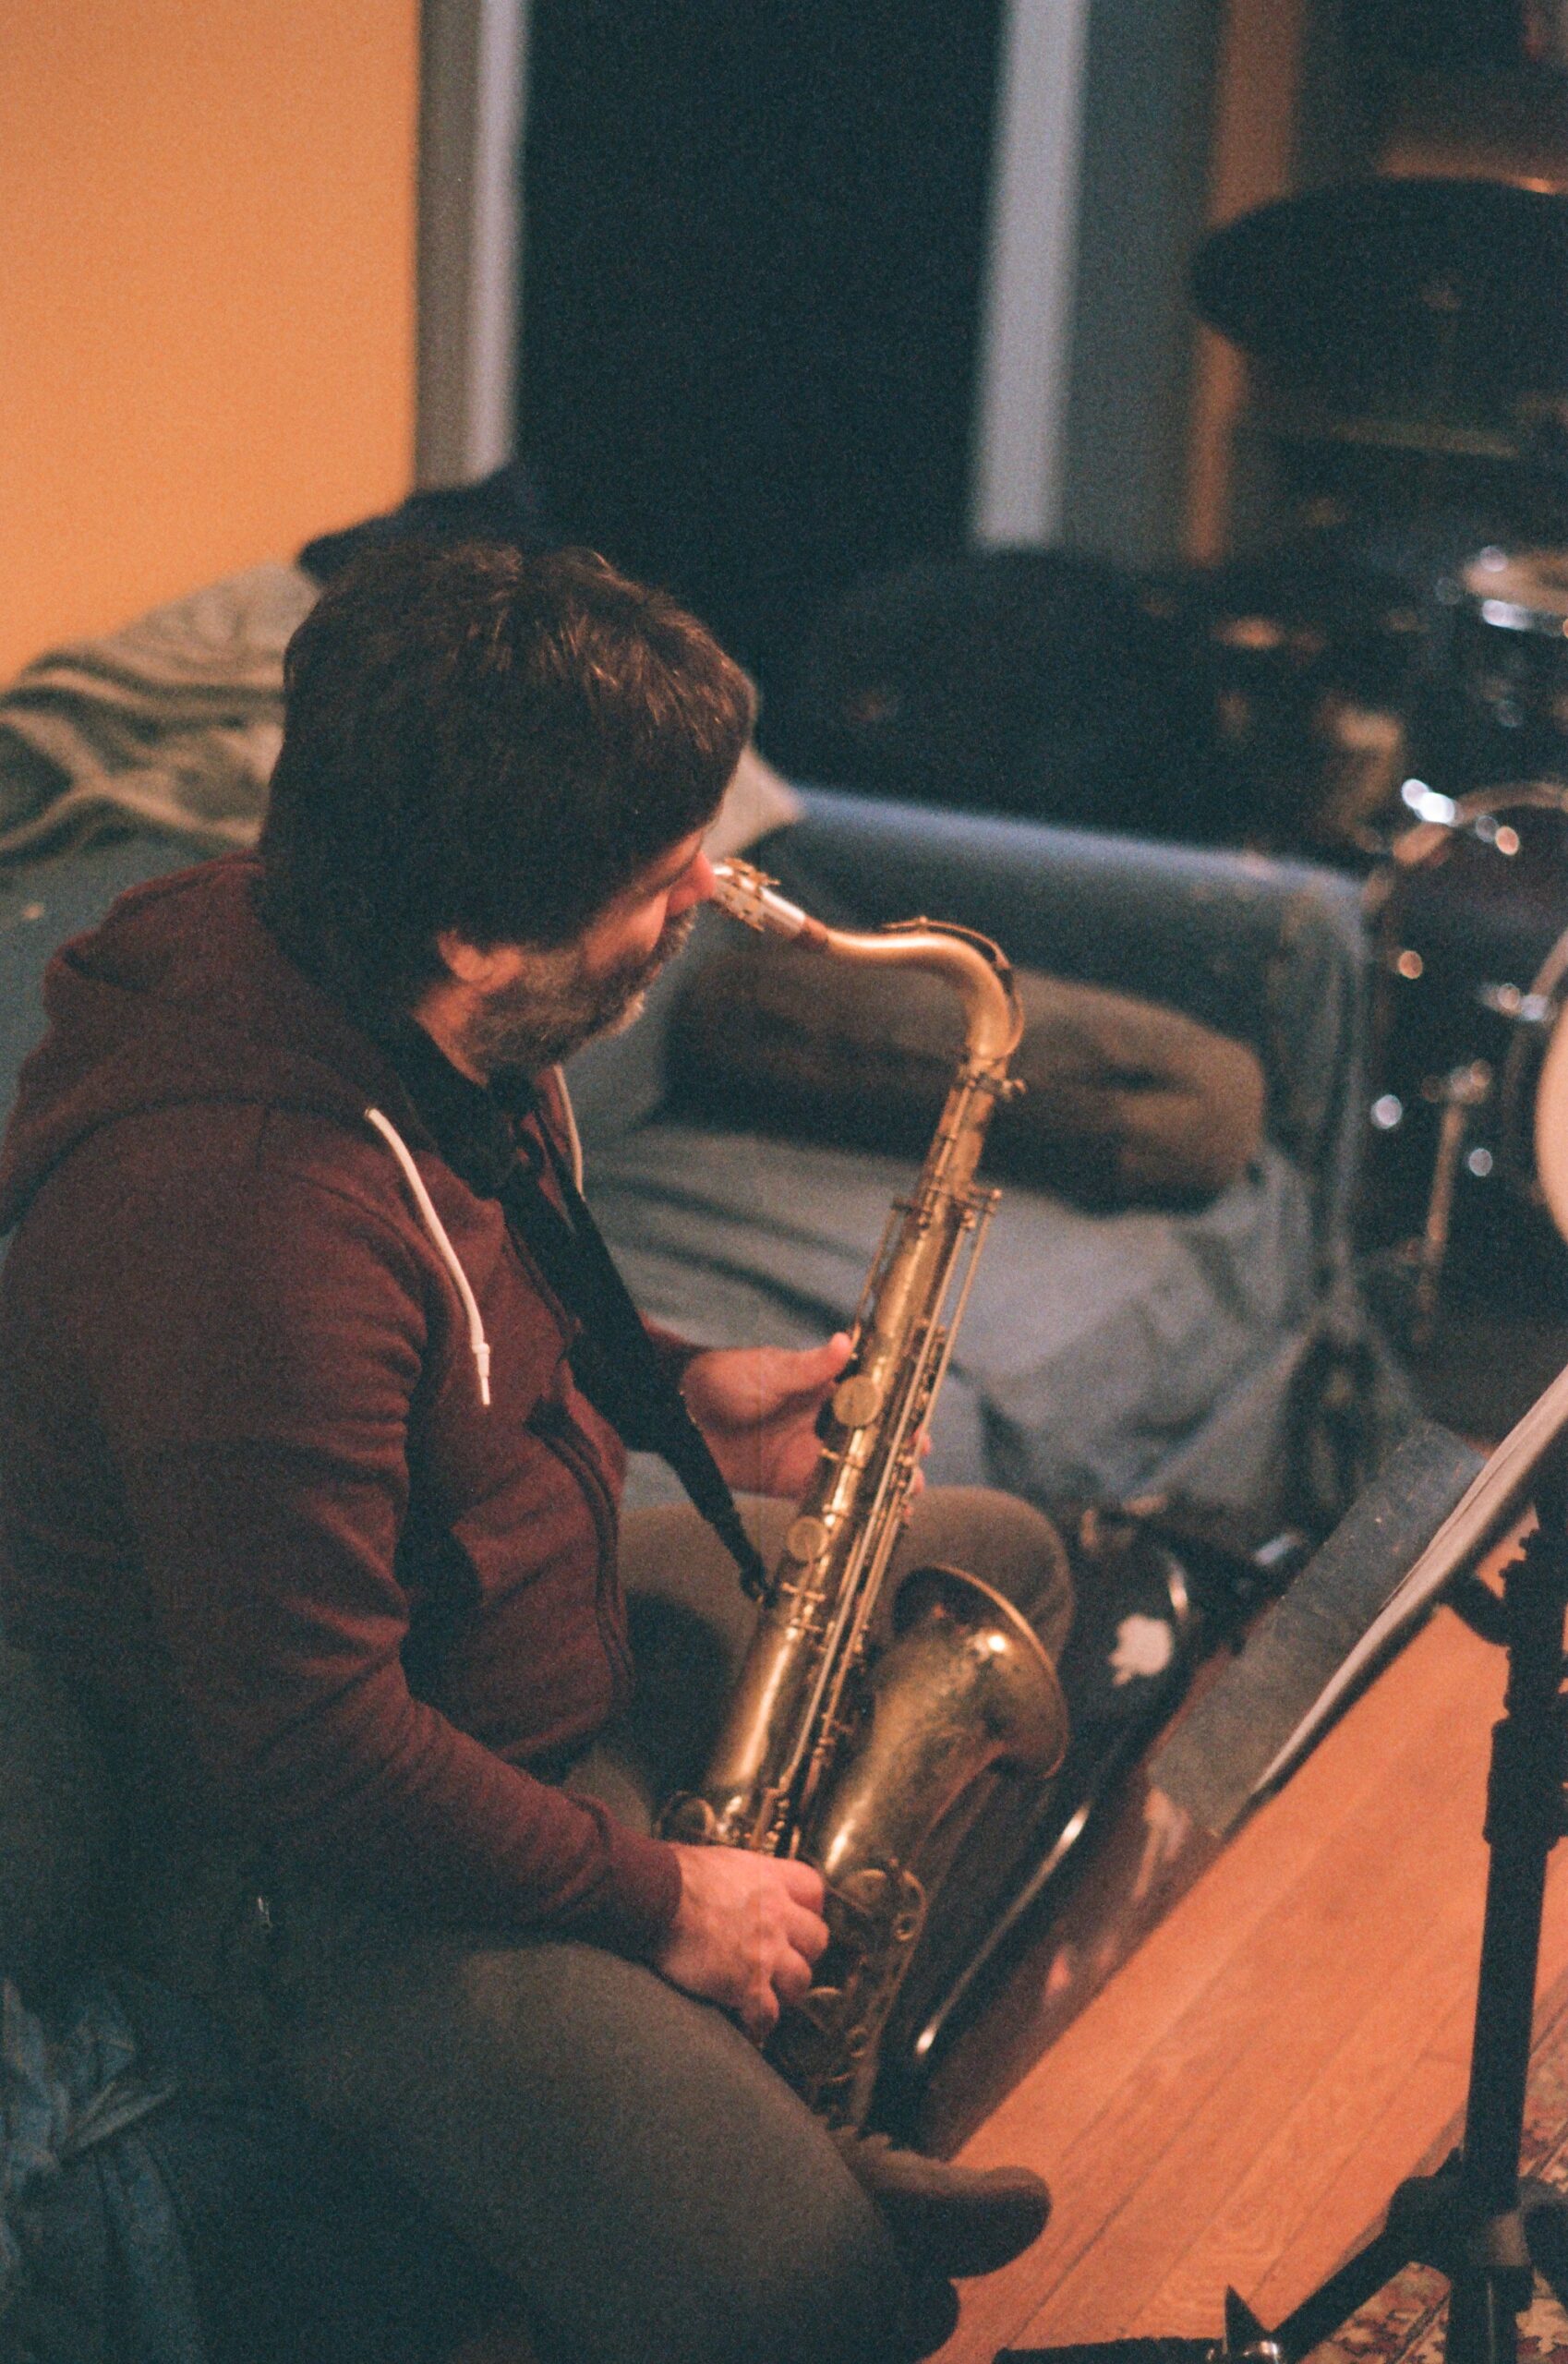 Person with saxophone sits on a blue couch